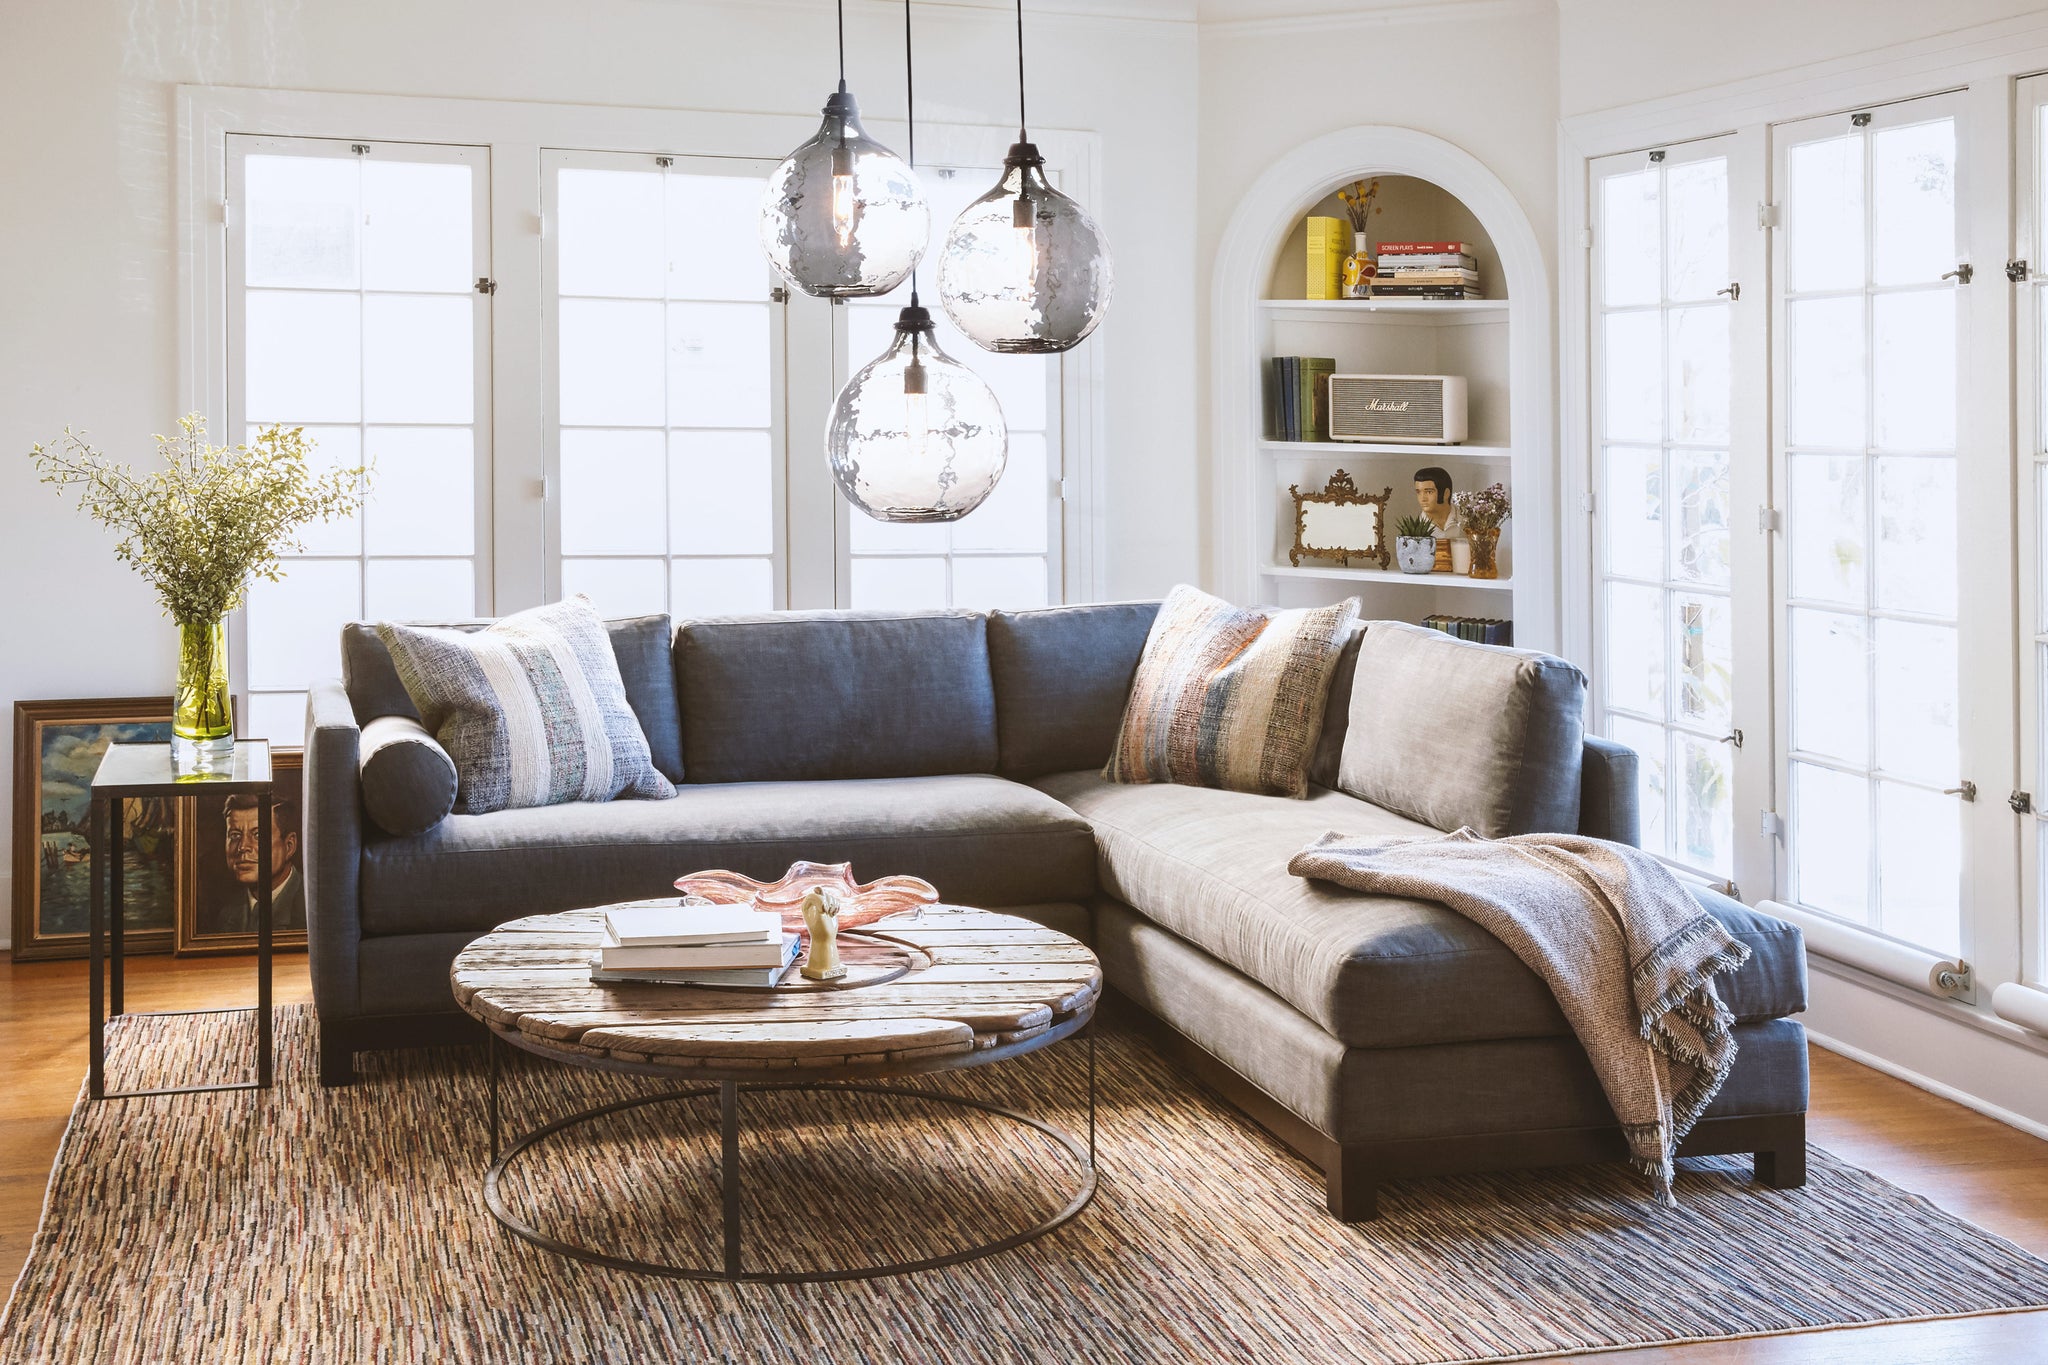  Cosmo Sectional sits in the center of a room next to a wood coffee table and glass side table. In the background are large windows with home decor items such as books and paintings. Above the sectional hangs 3 jug lamps. 